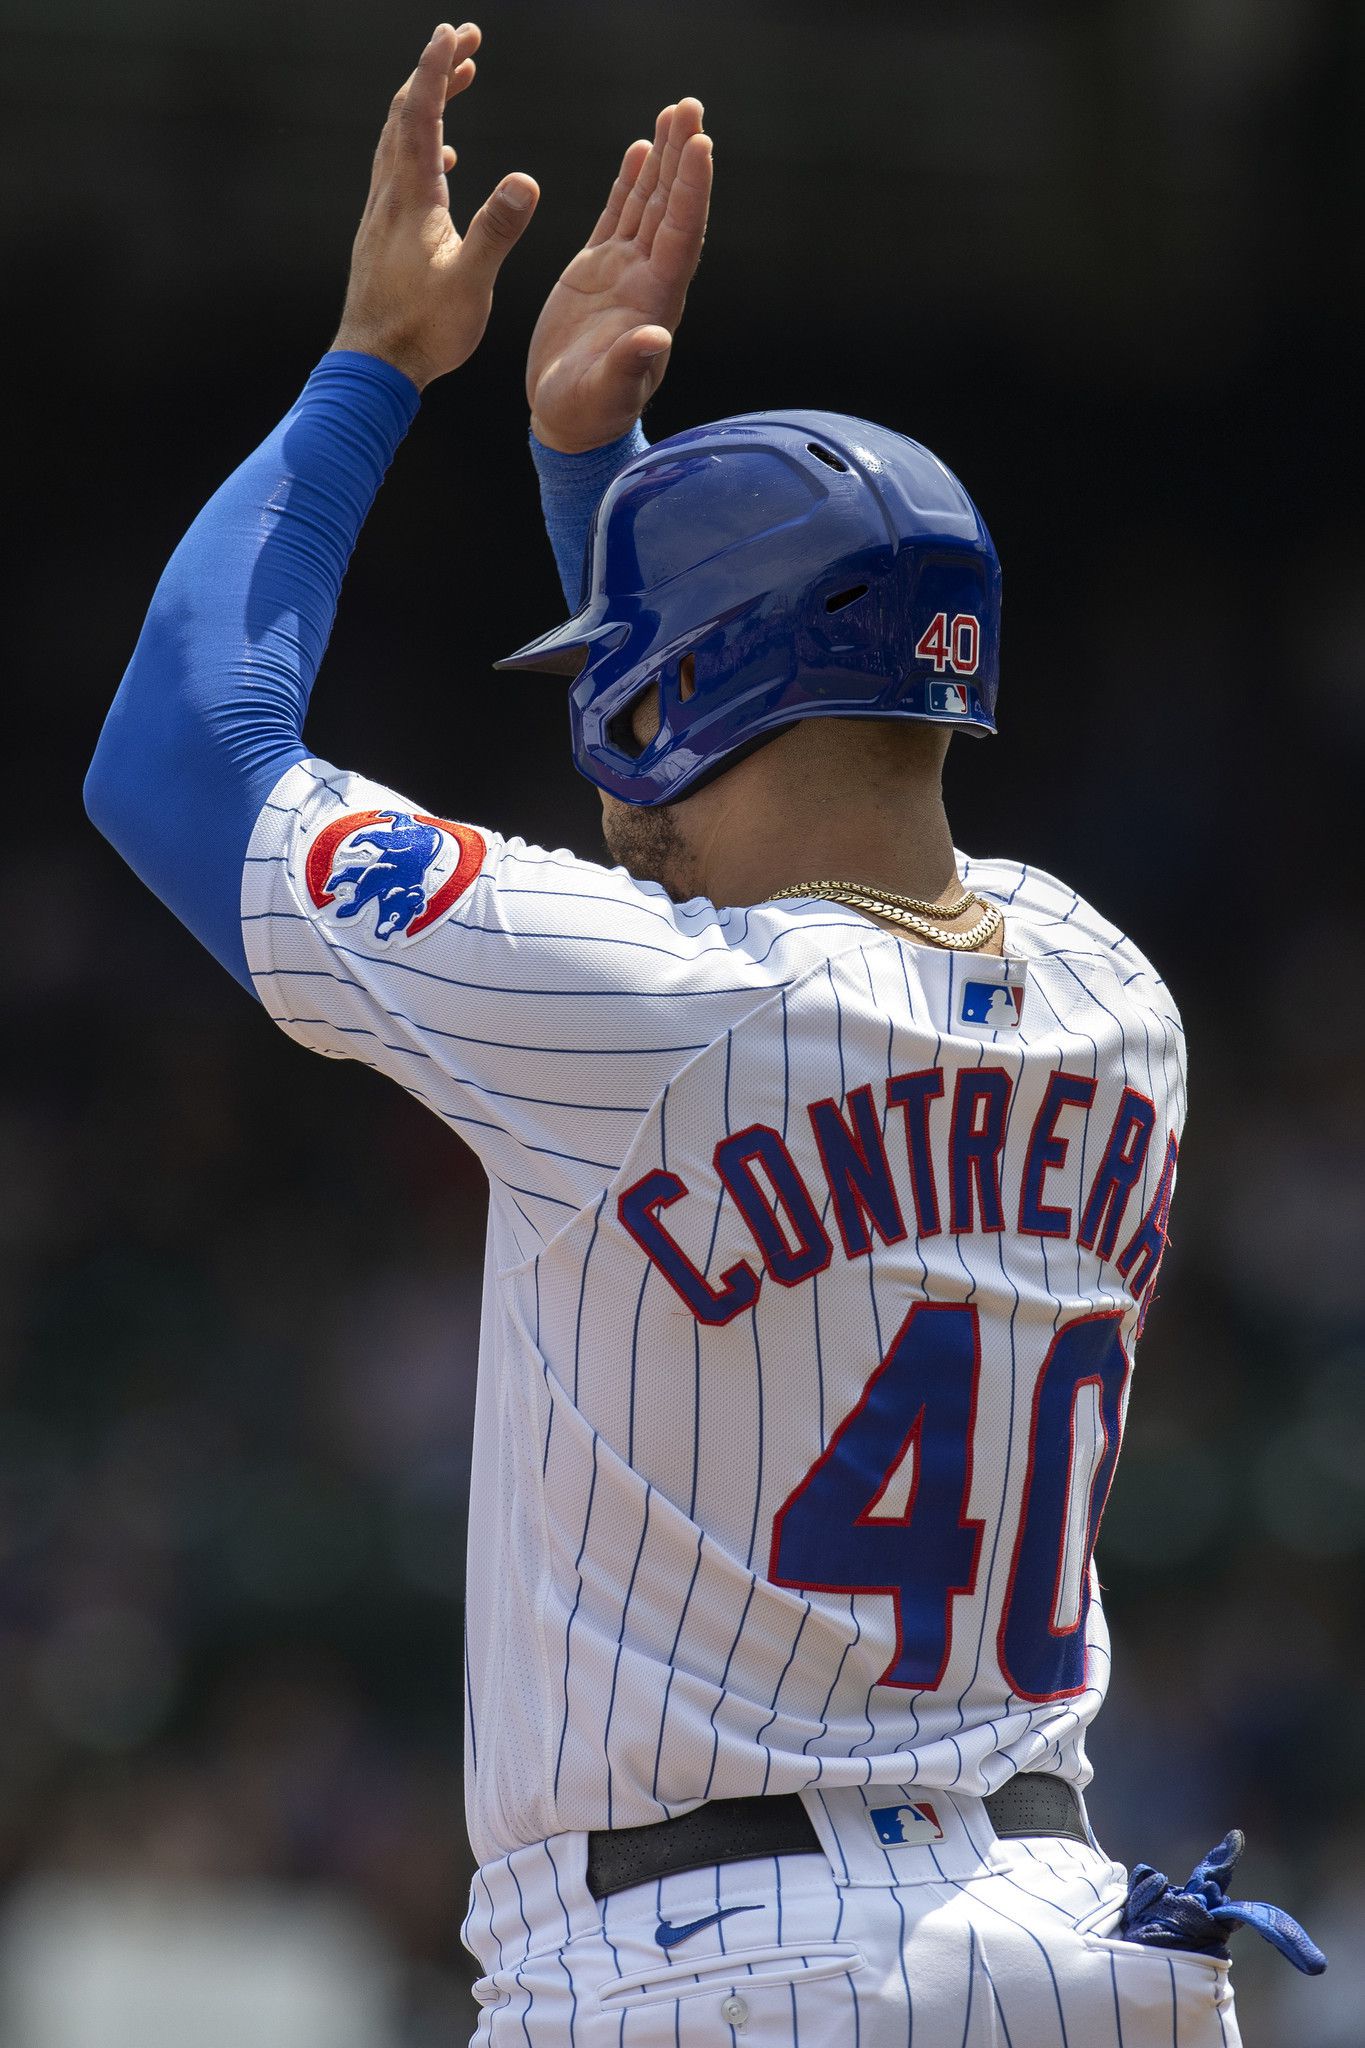 Photos: Last game at Wrigley Field for Willson Contreras and Ian Happ with Chicago Cubs?